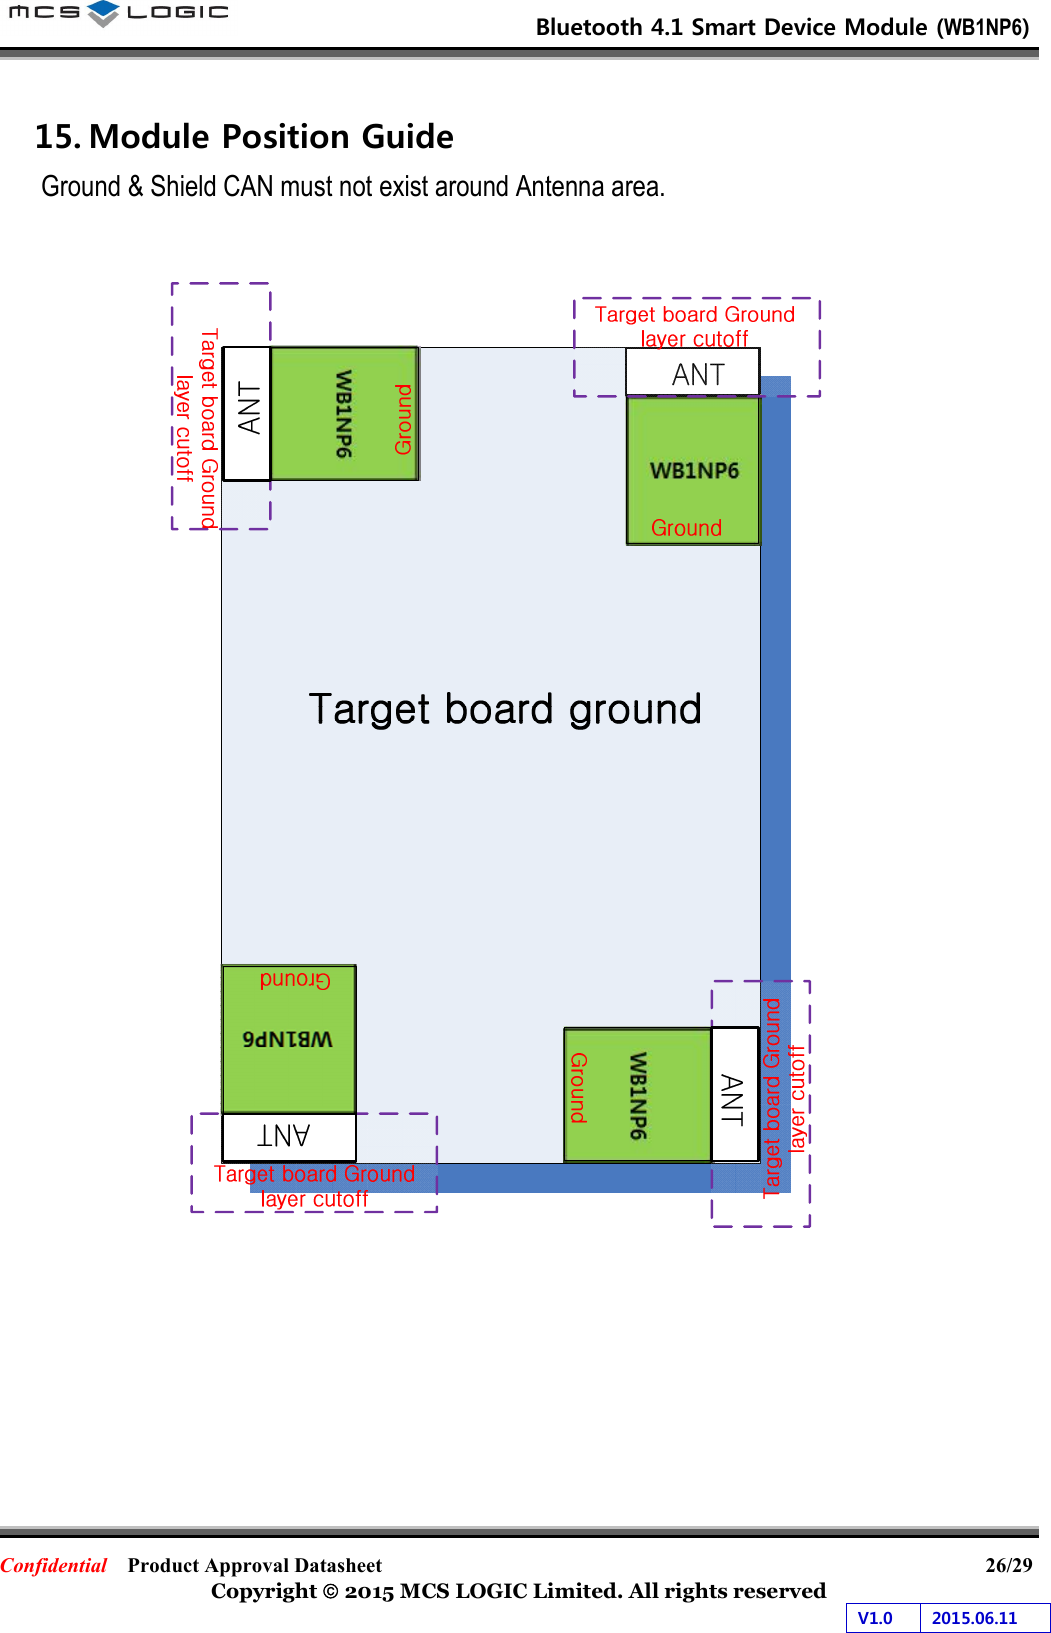                           Bluetooth 4.1 Smart Device Module (WB1NP6)                        Confidential    Product Approval Datasheet                                                           26/29 Copyright  2015 MCS LOGIC Limited. All rights reserved V1.0  2015.06.11  15. Module Position Guide Ground &amp; Shield CAN must not exist around Antenna area.     